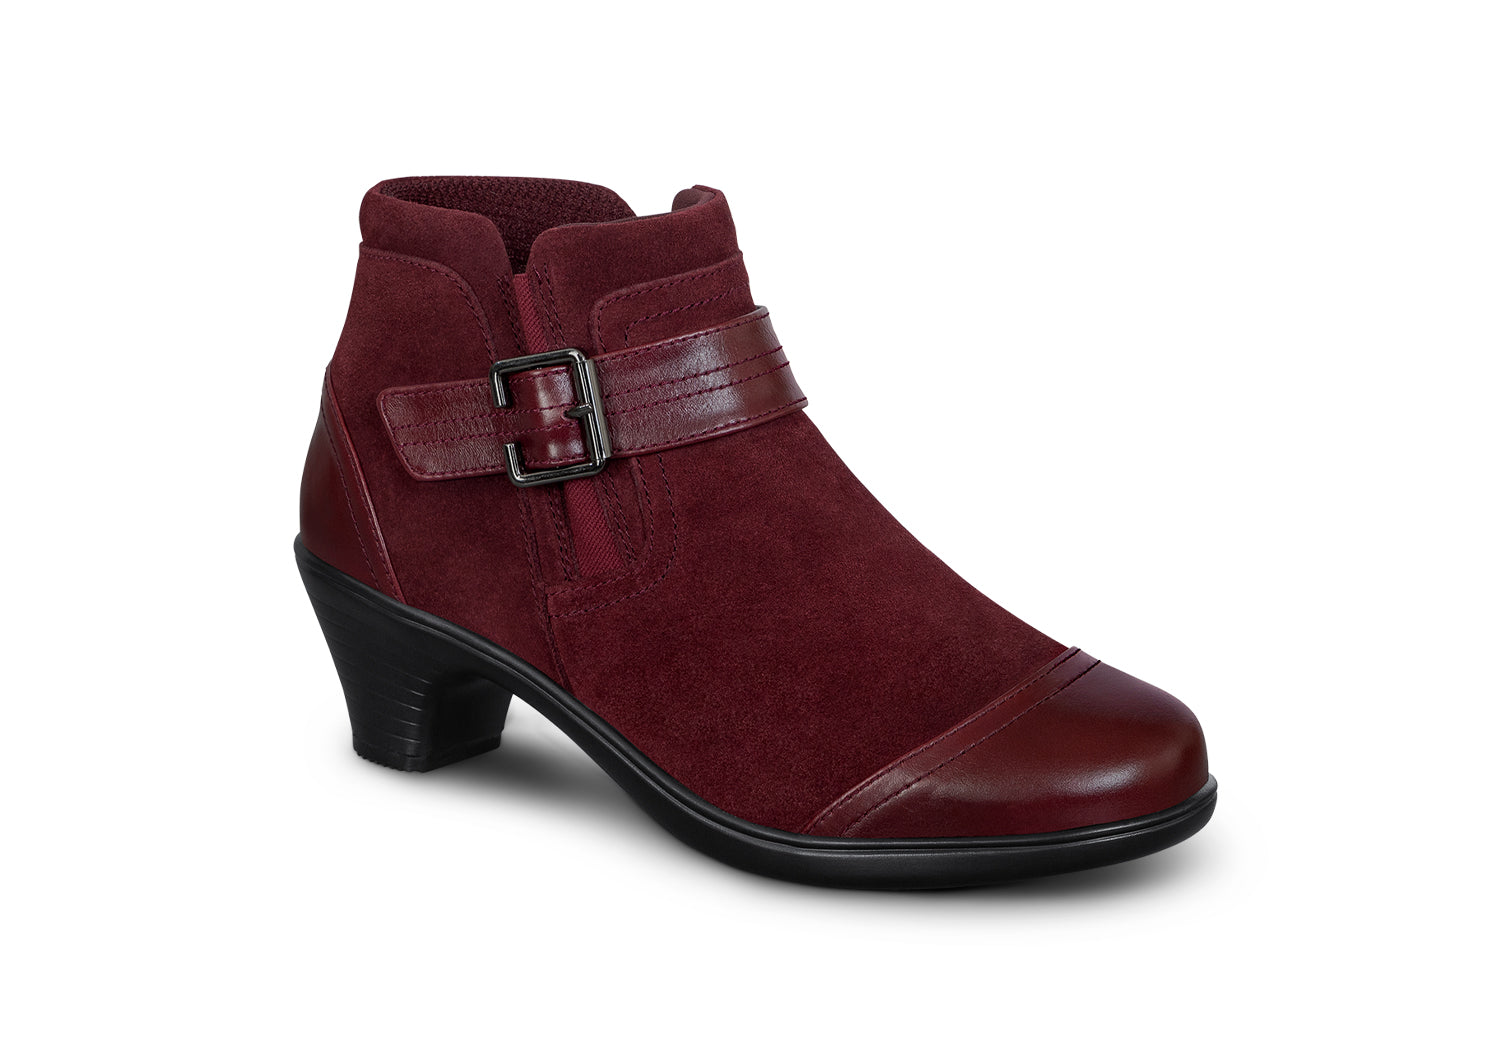 new arrival ladies ankle boots low| Alibaba.com